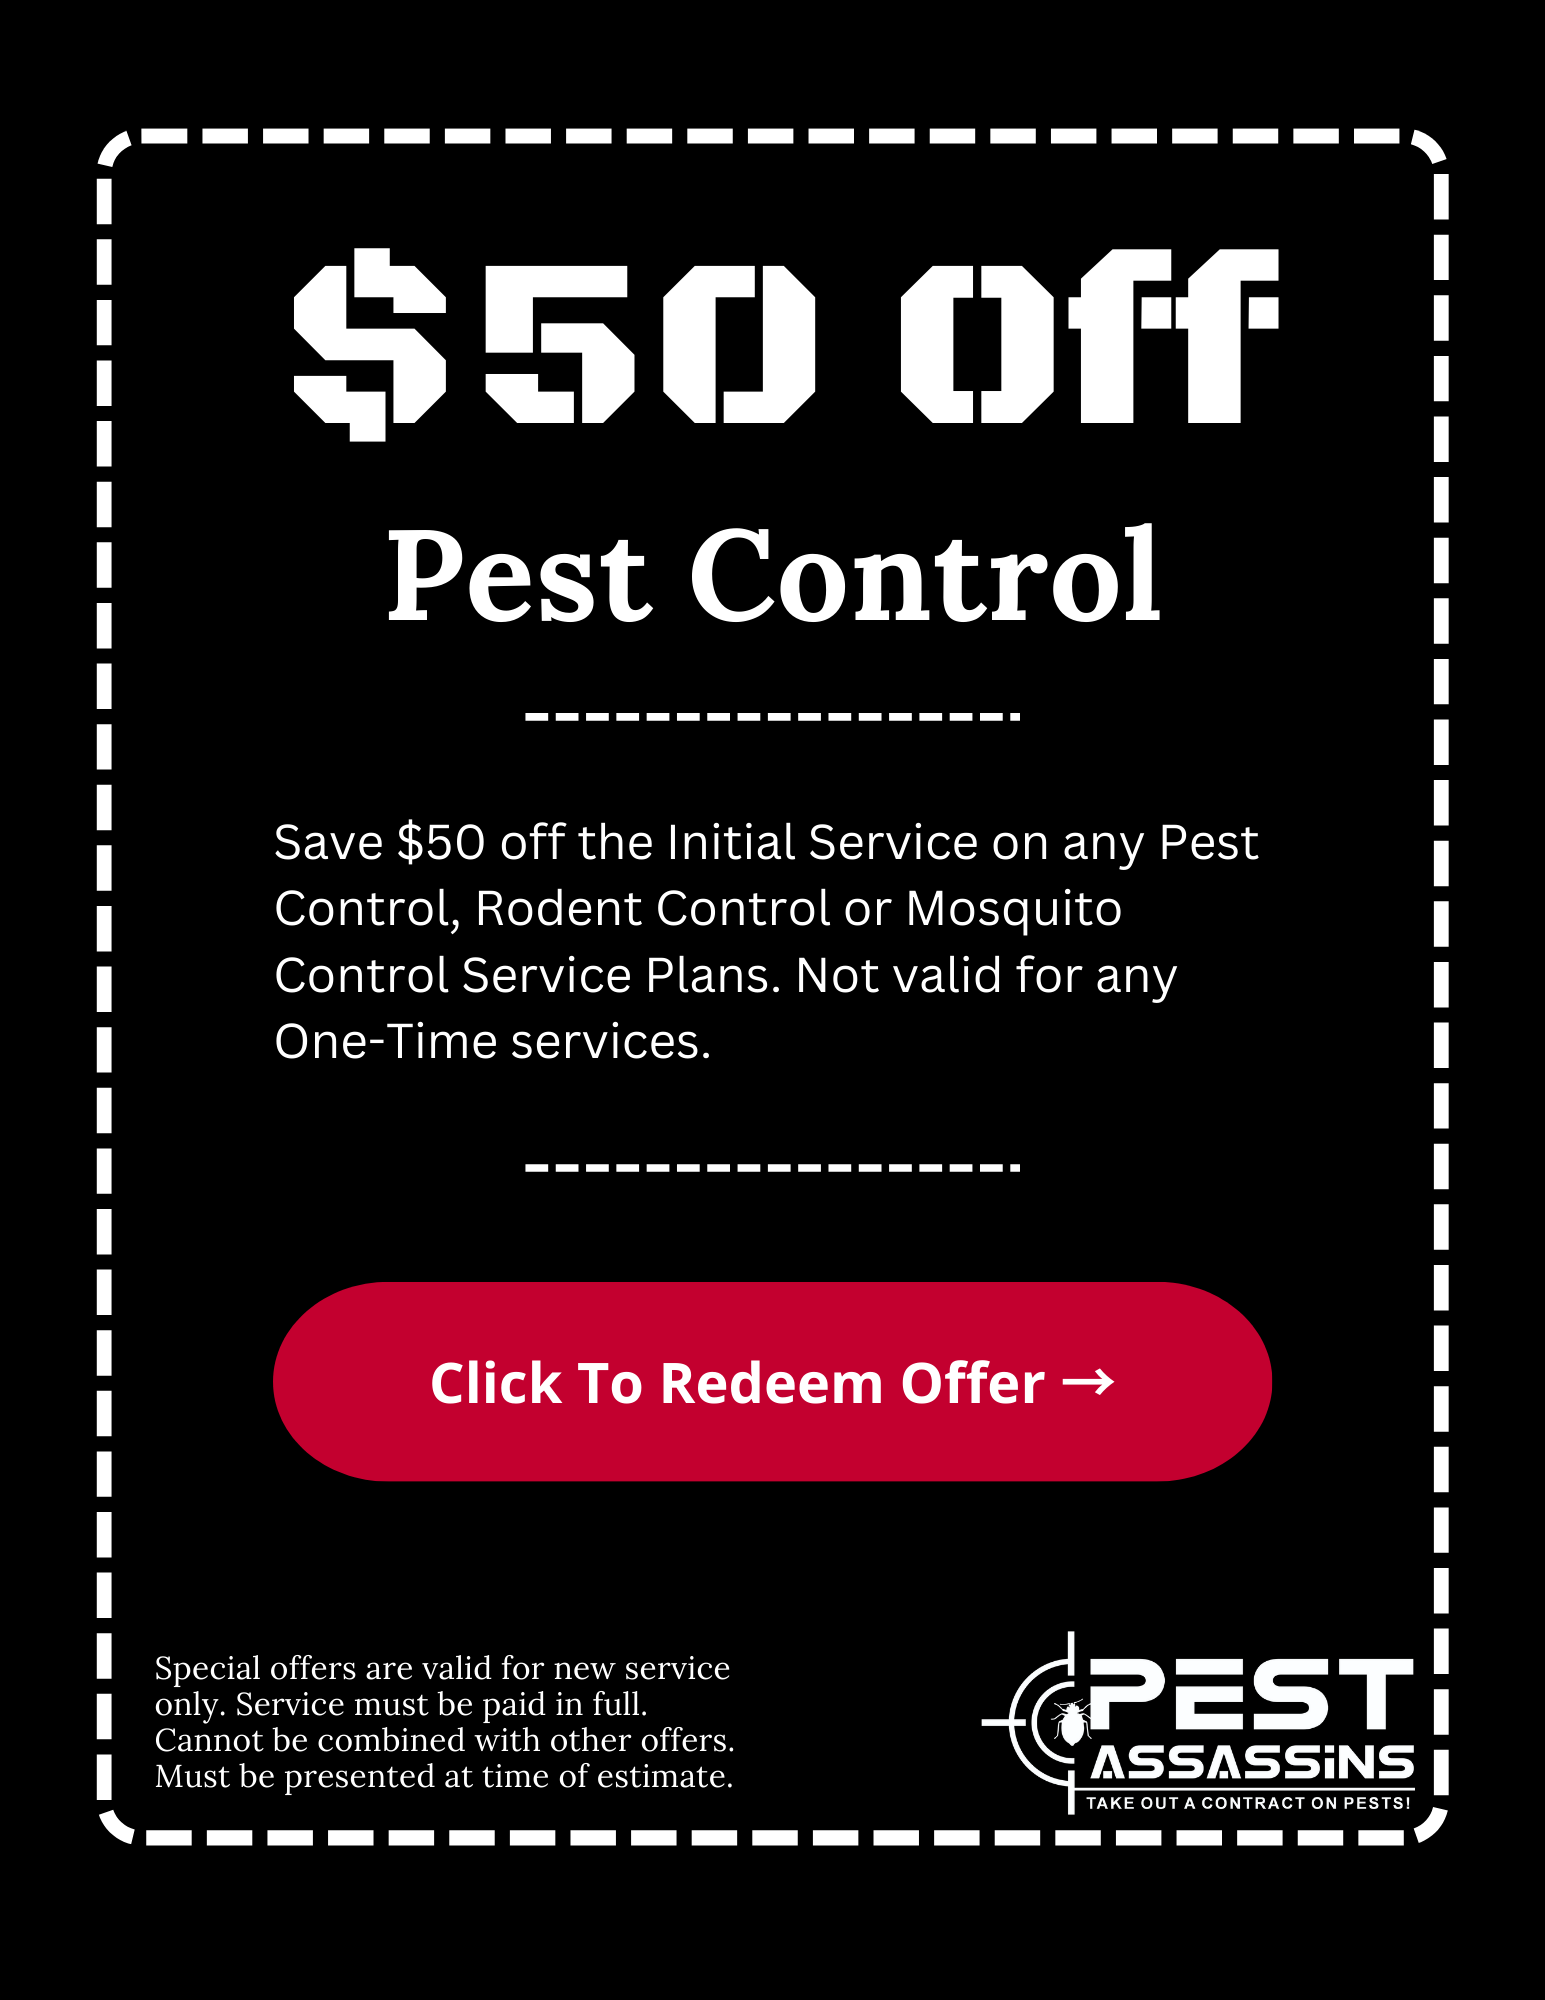 pest control coupon offer Rhode Island and Massachusetts